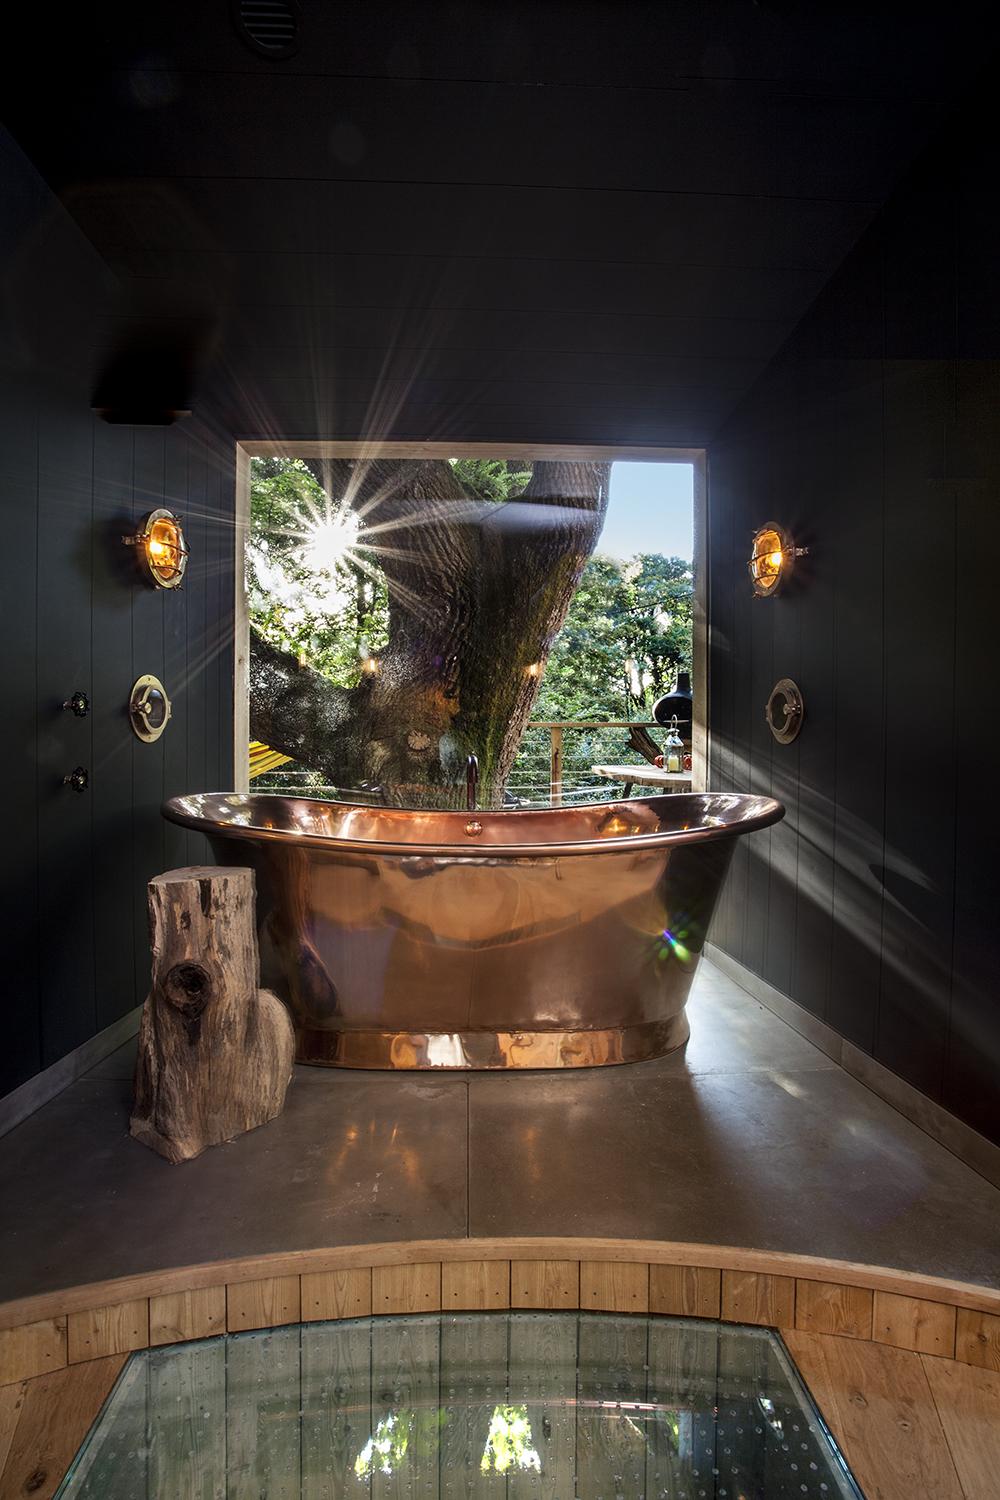 The outrageously deep copper tub overlooks the lower deck